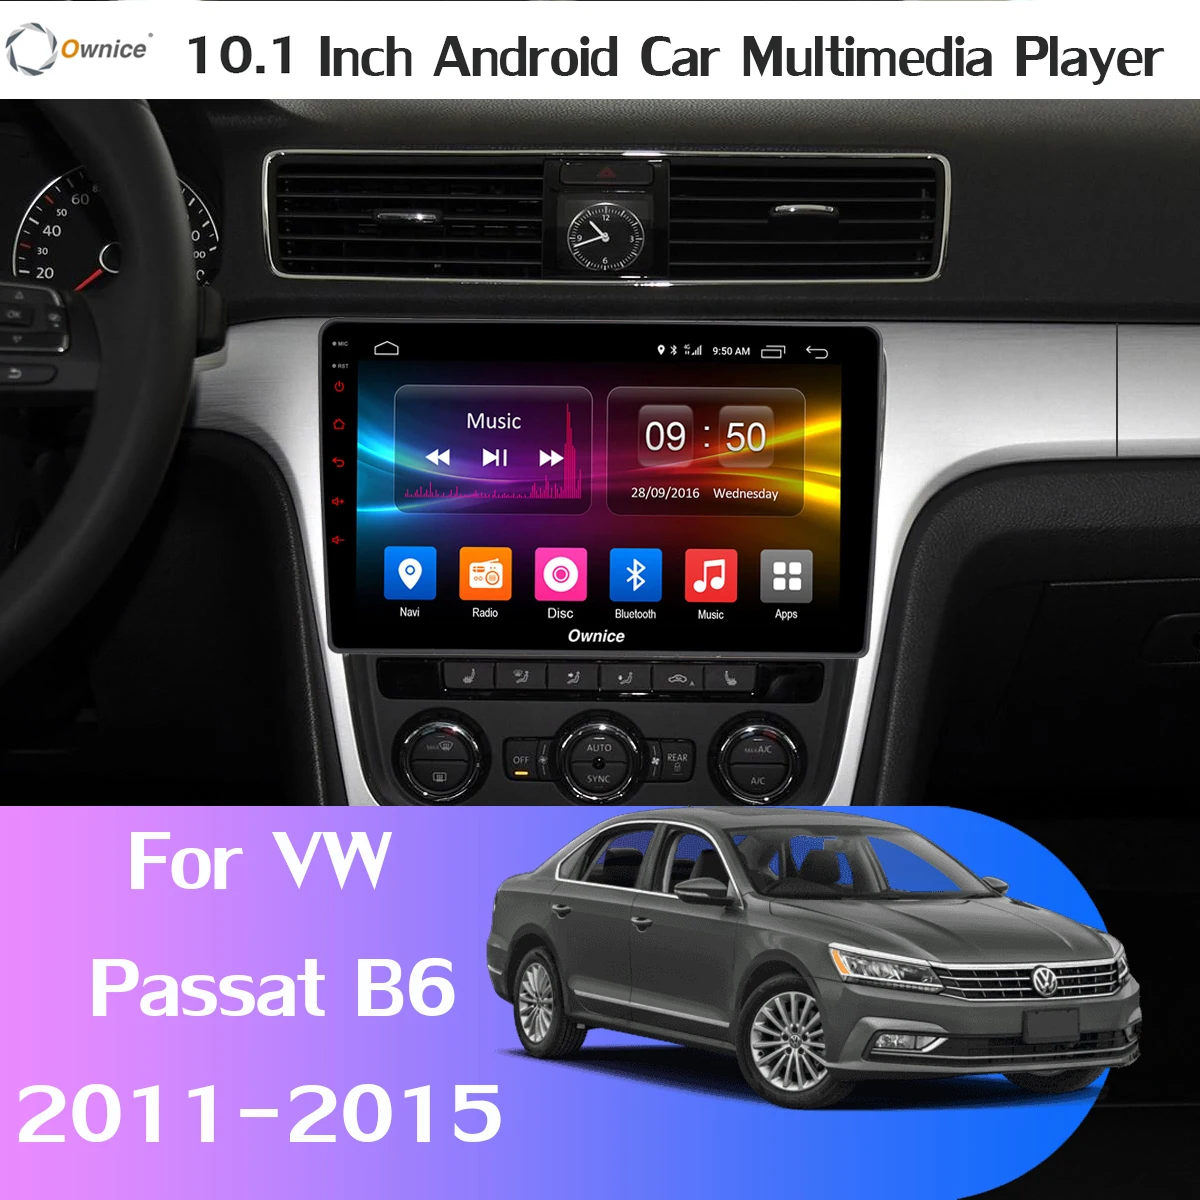 Discount 4G SIM WiFi 360° DVR AHD Camera Android 9.0 8Core 4GB+64GB DSP CarPlay Car Multimedia all in 1 Player for VW Passat B6 GPS Radio 1